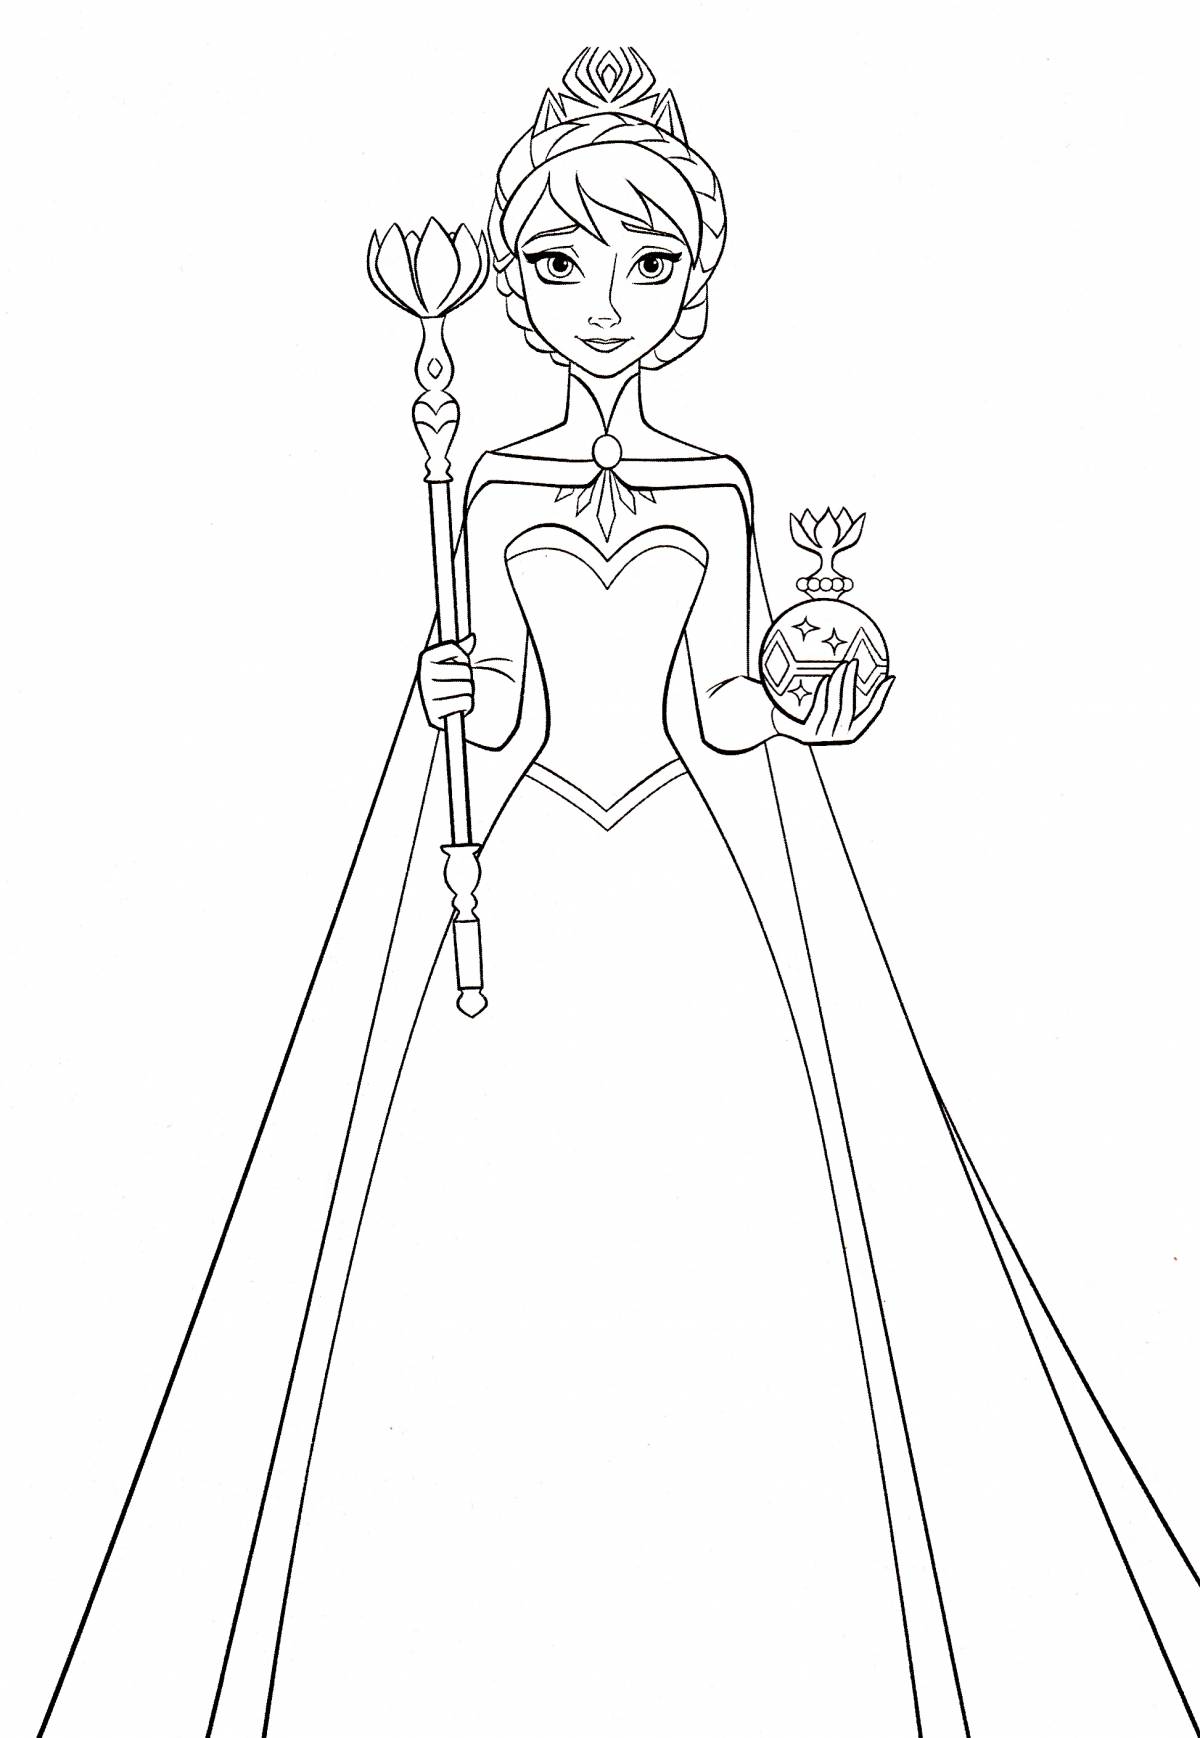 Exalted queen elsa coloring page